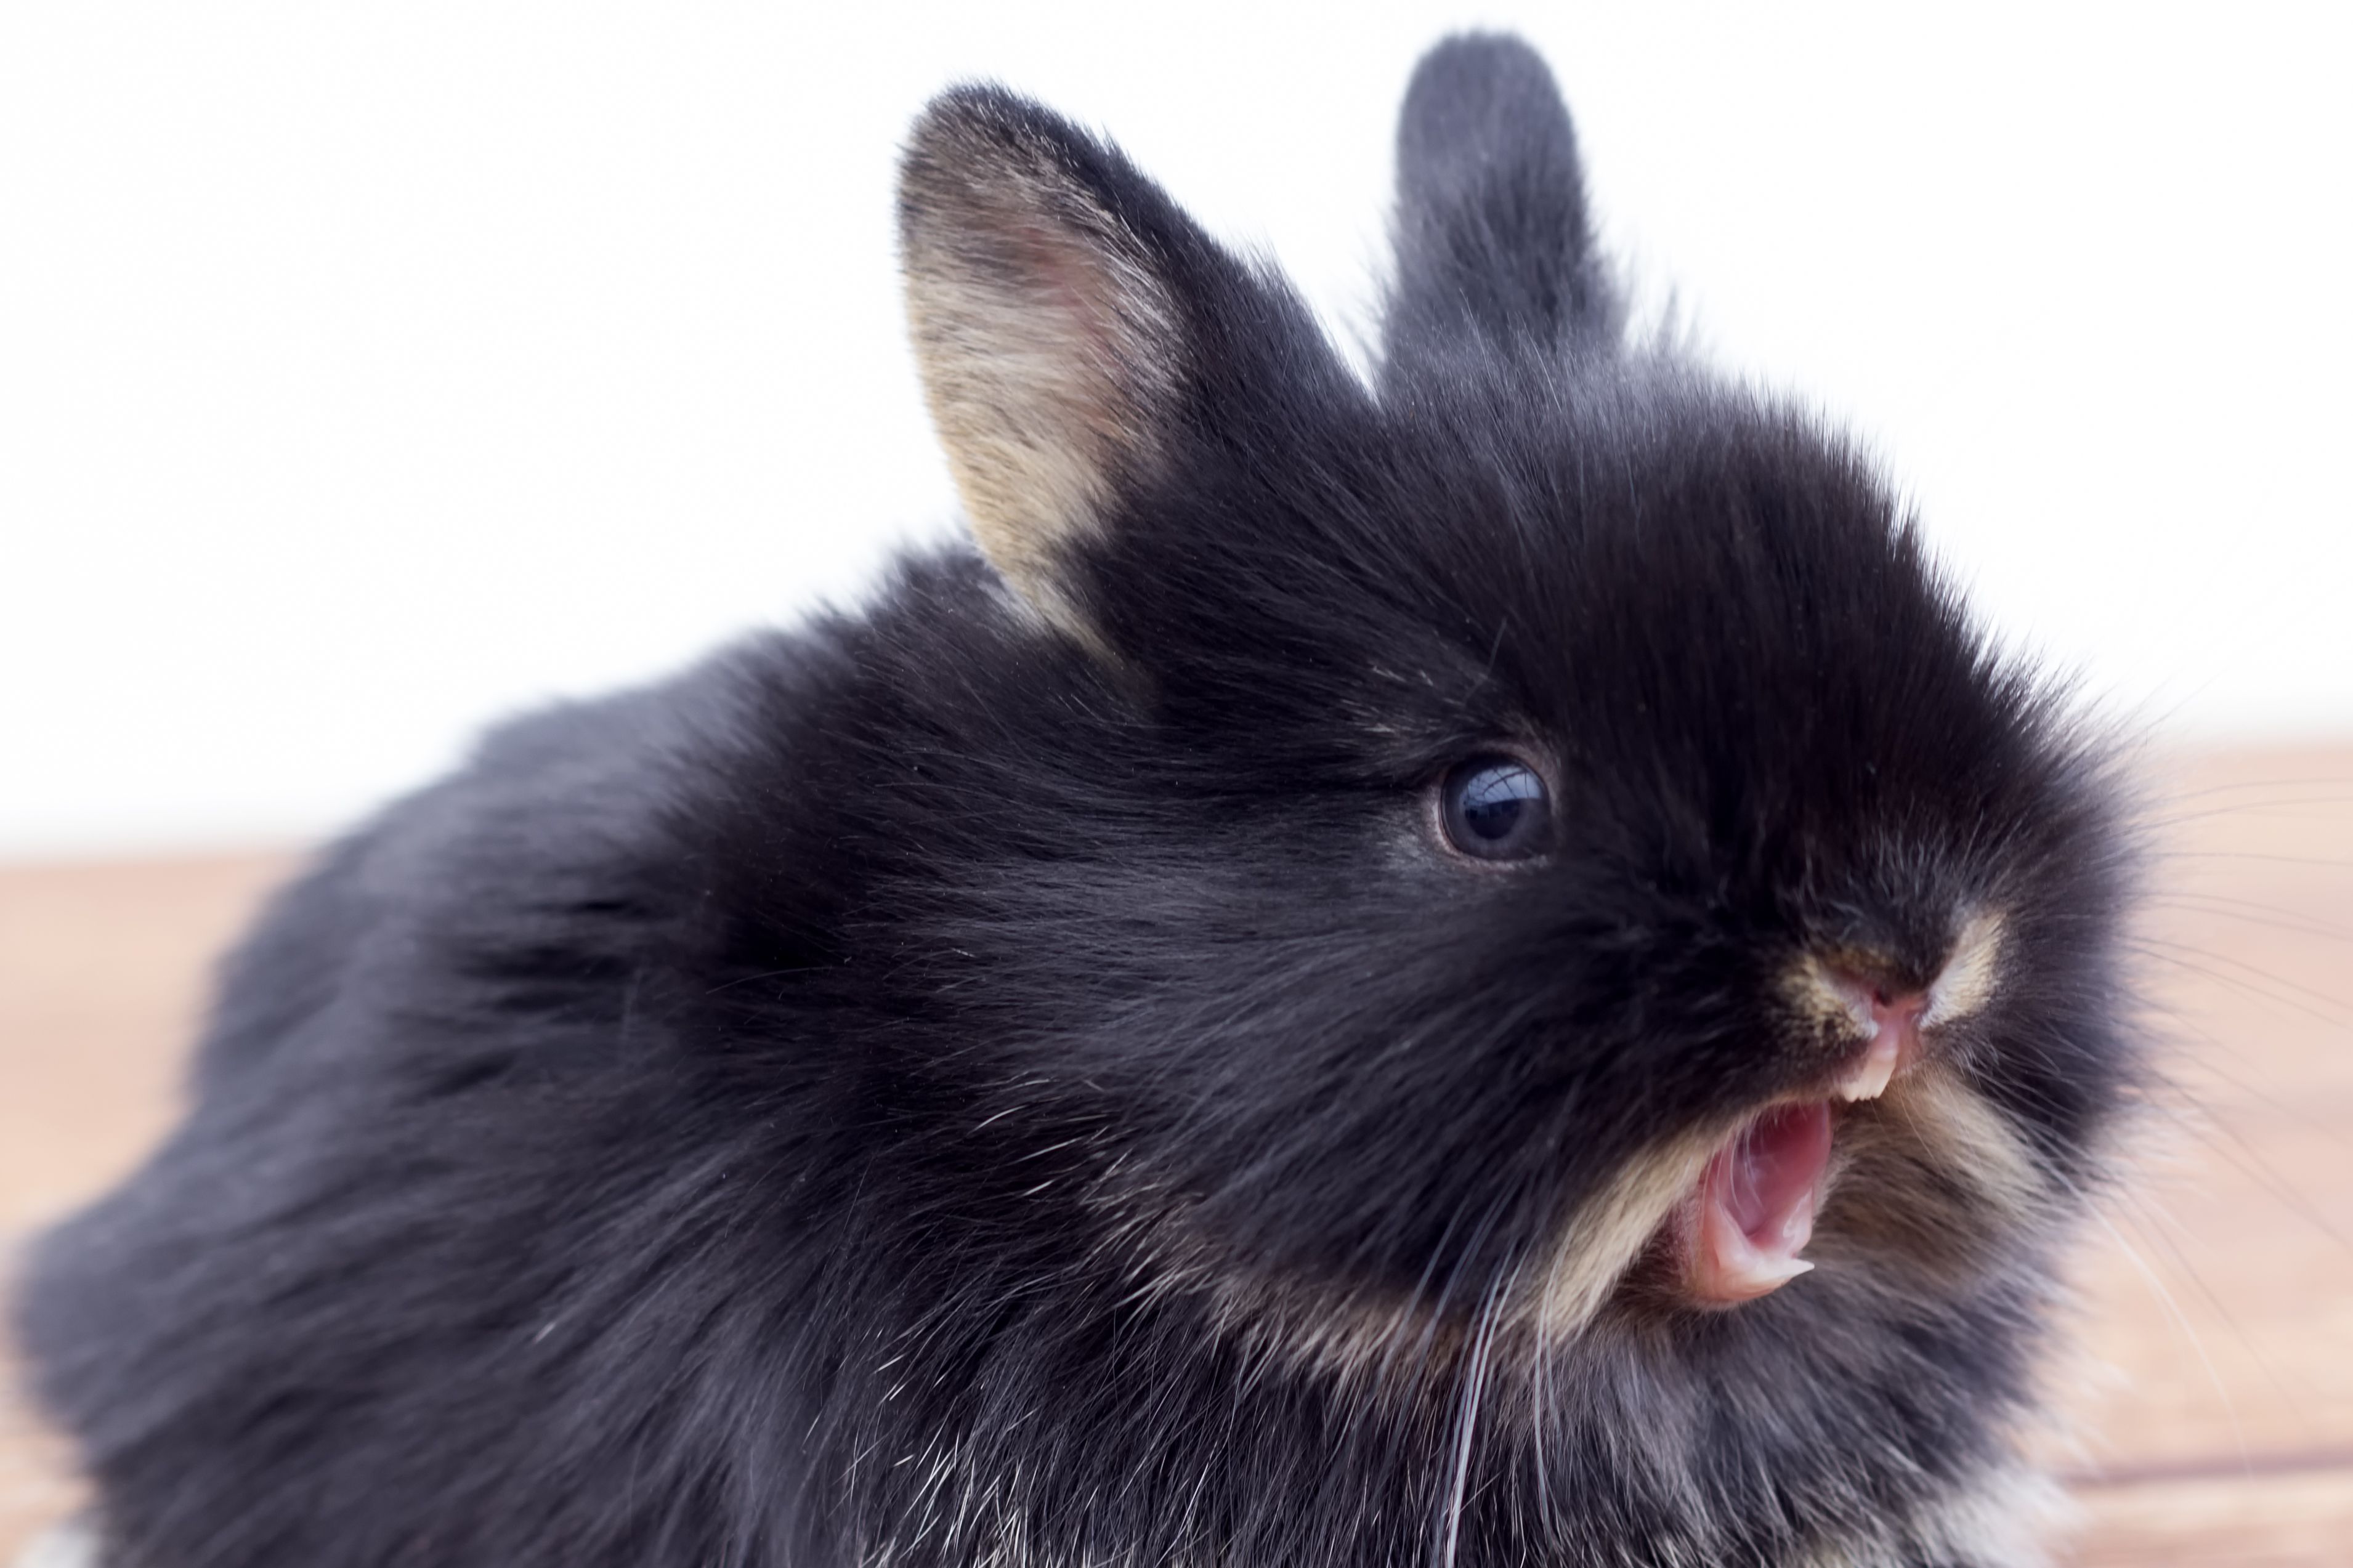 What happens if a rabbit has too big of a tooth?